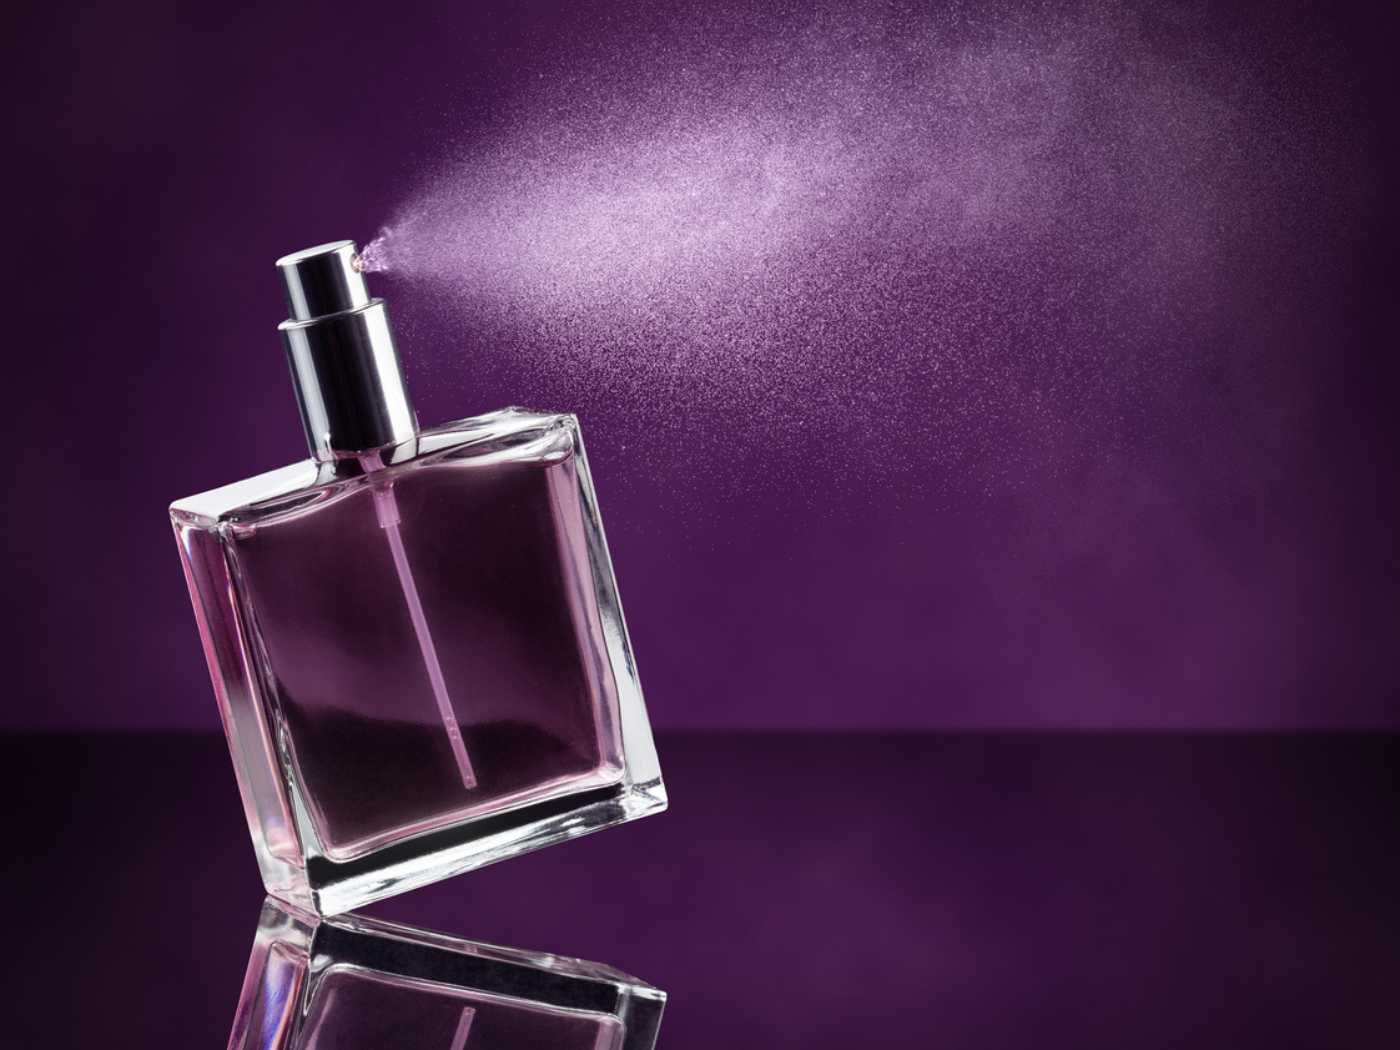 Clear, square fragrance bottle spraying against a purple background